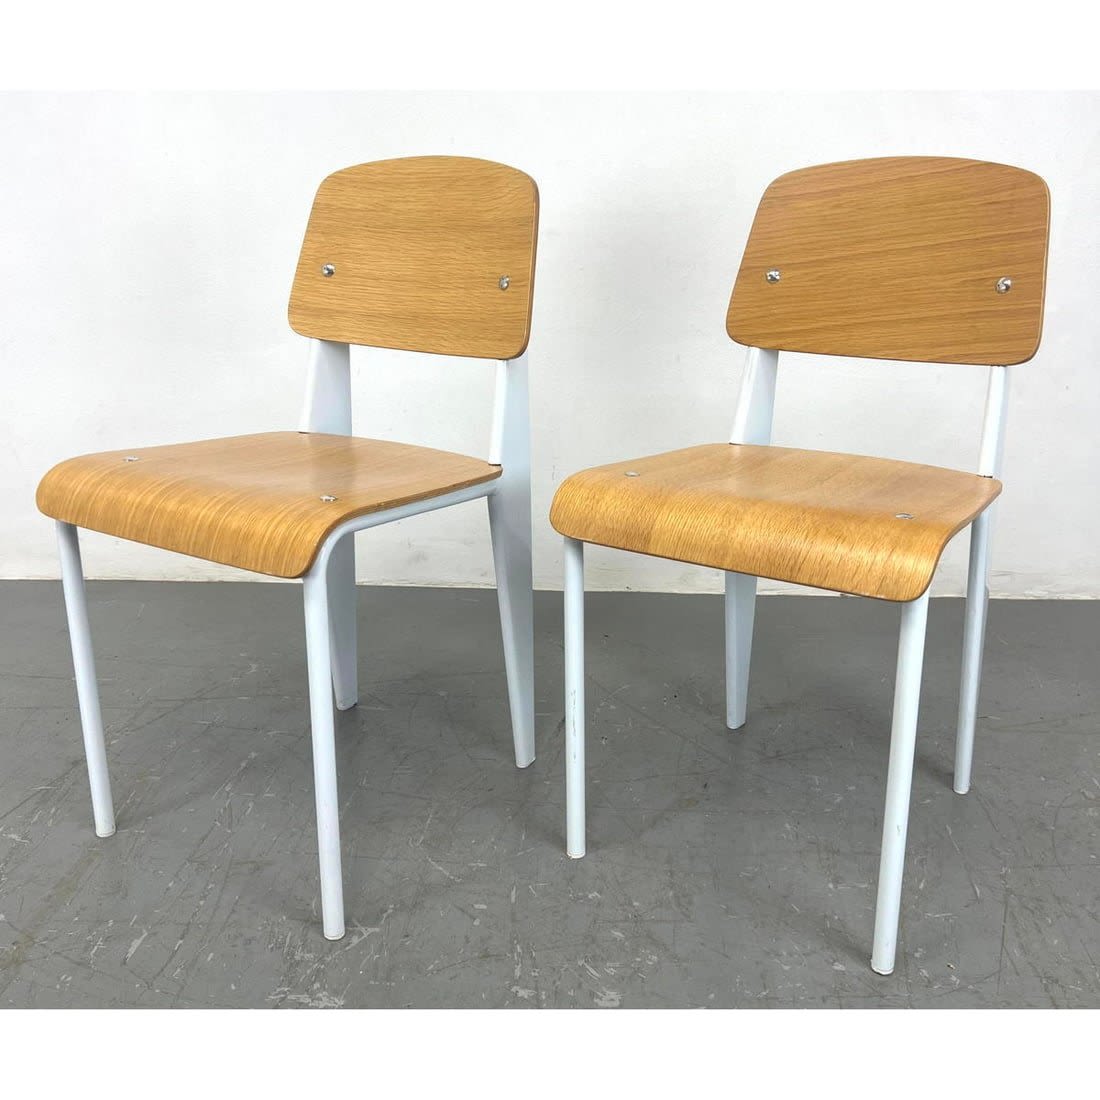 Pr Jean Prouve inspired Side Chairs  362da8